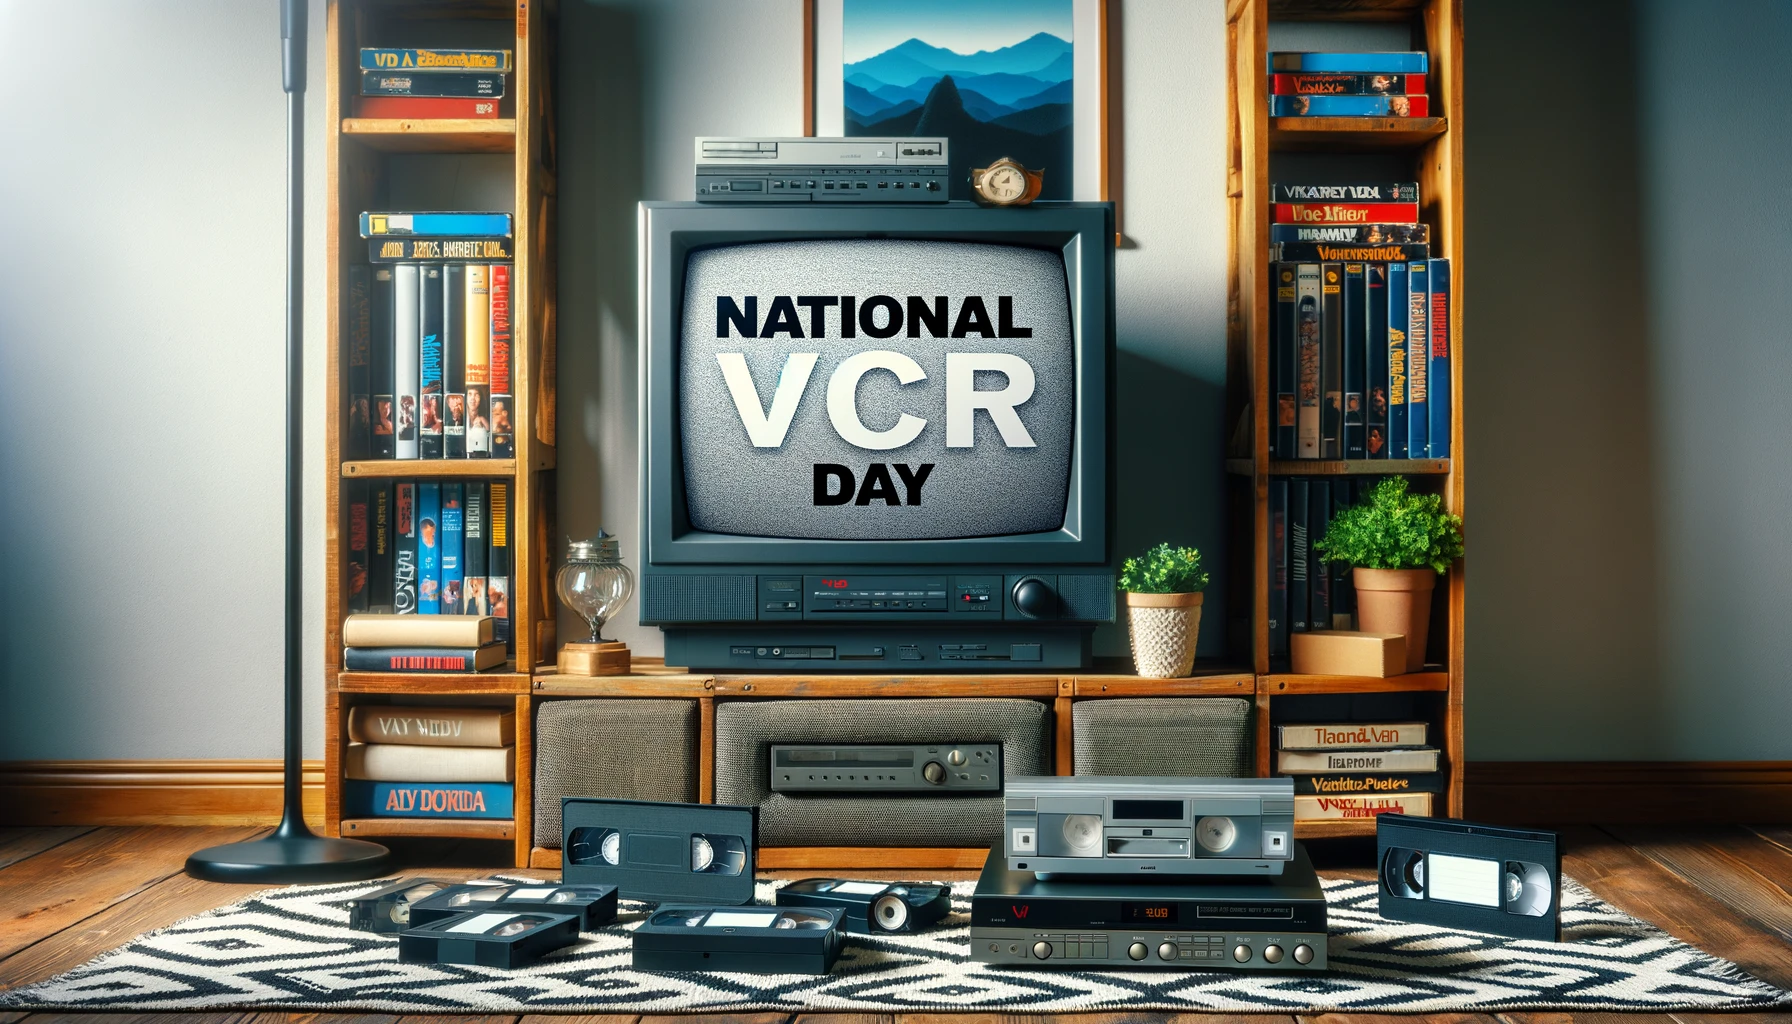 National VCR Day Quotes, Wishes 